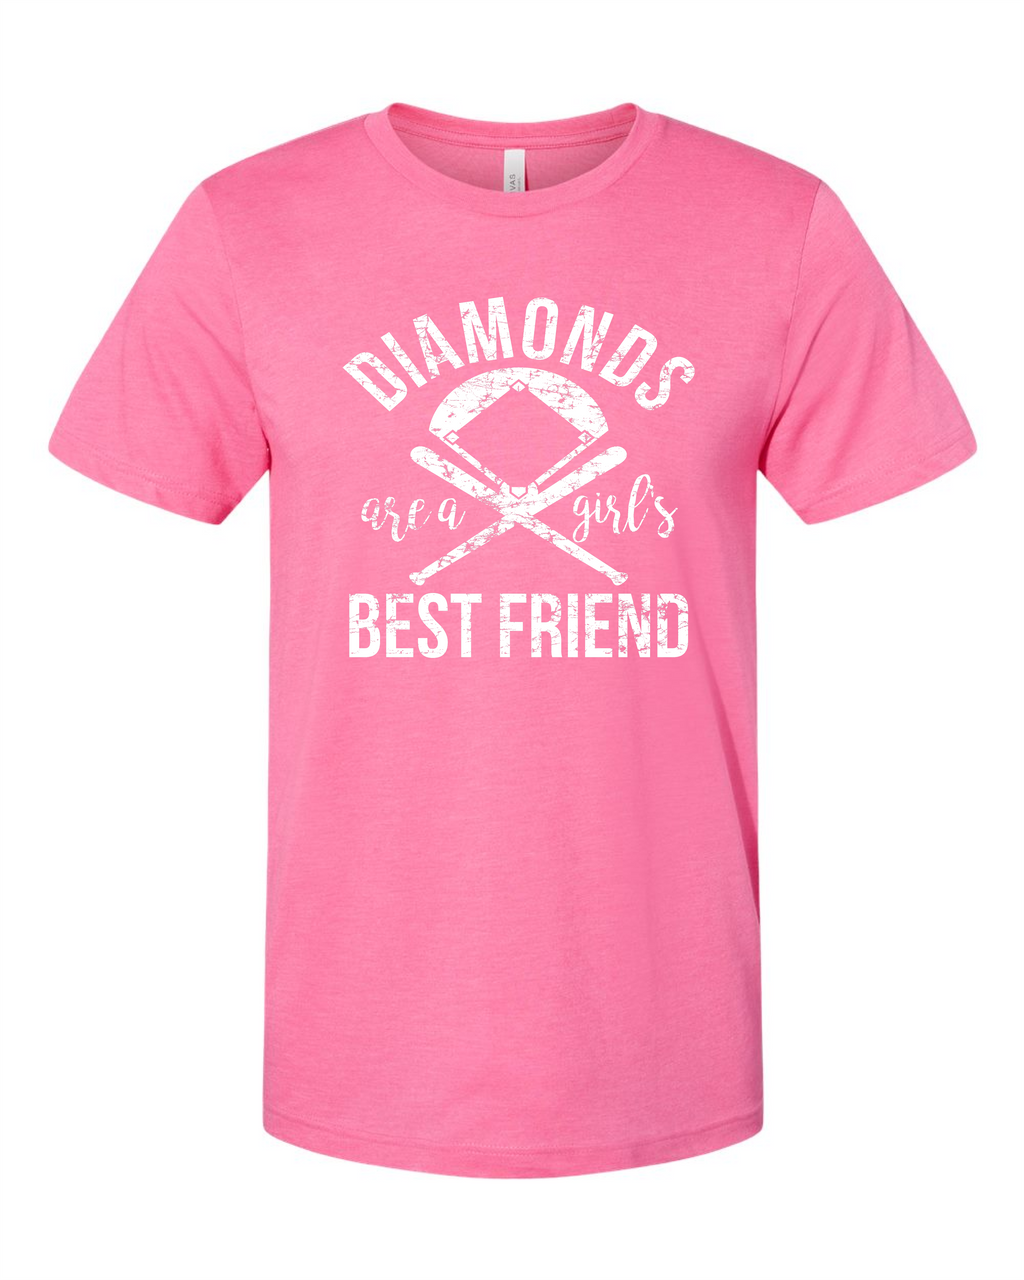 "diamonds are a girl's best friend" tee in heather pink